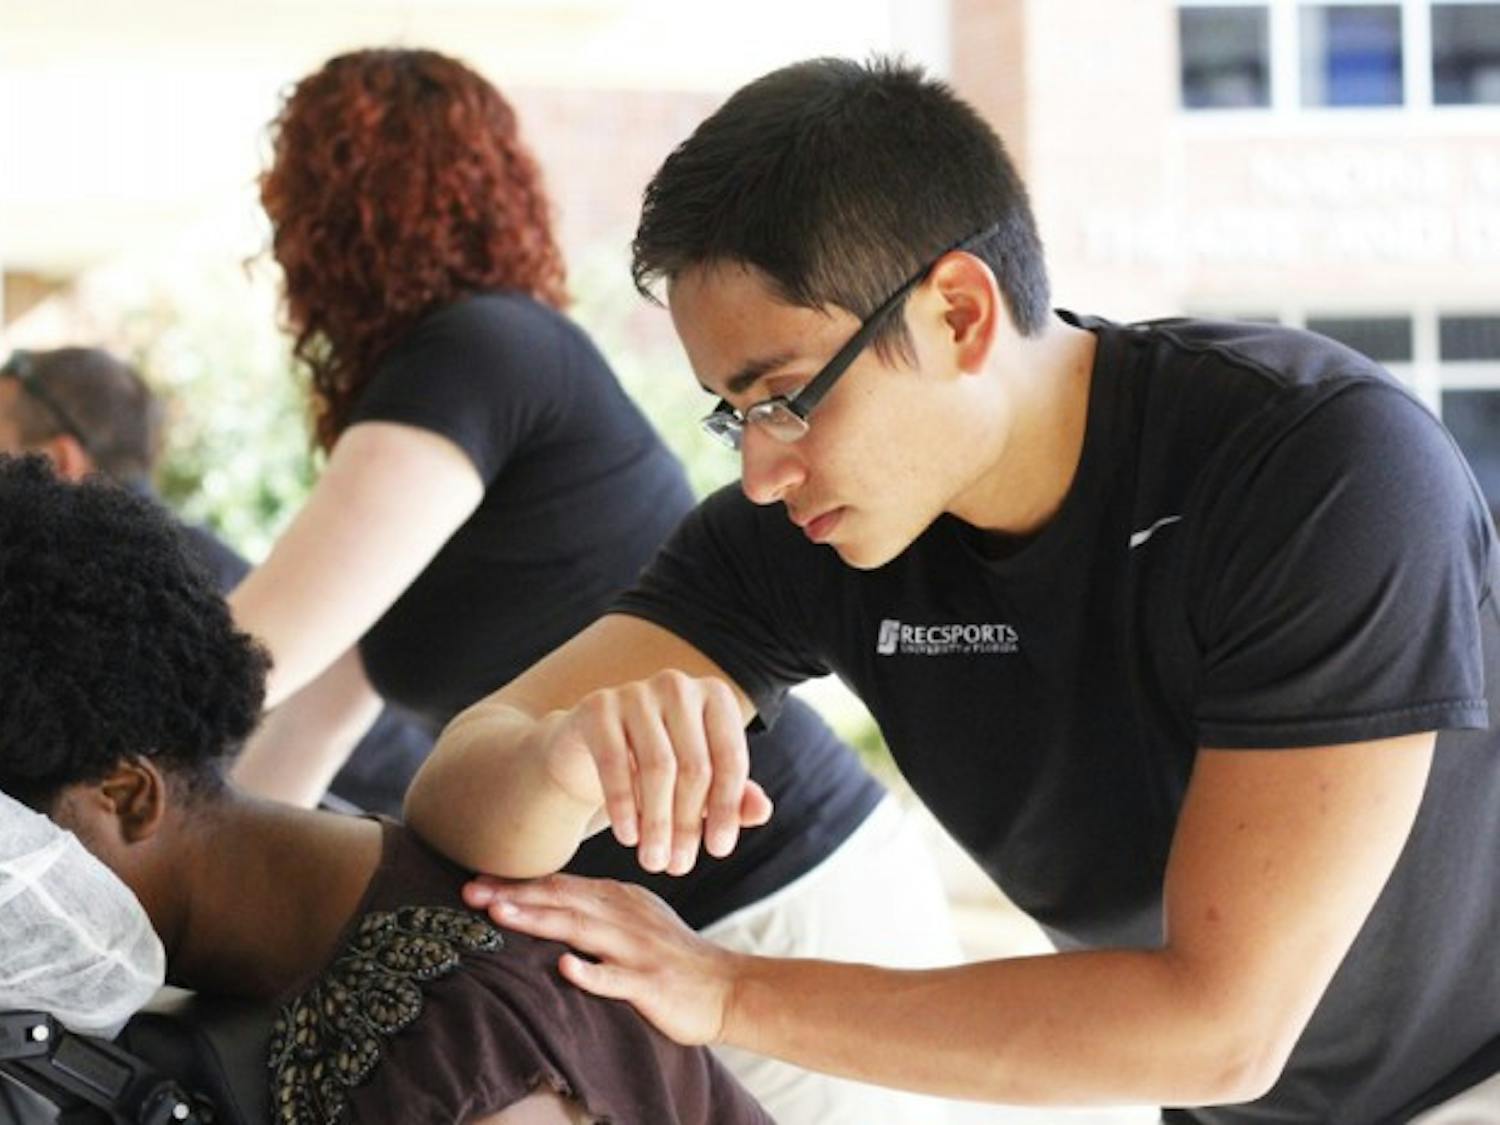 Andres Ramirez, a 23-year-old RecSports employee and food science and nutrition alumnus, massages Jennifer Polexi, a 18-year-old UF marketing sophomore. Polexi waited 15 minutes for her five-minute massage. “It felt like it wasn’t long at all,” she said.